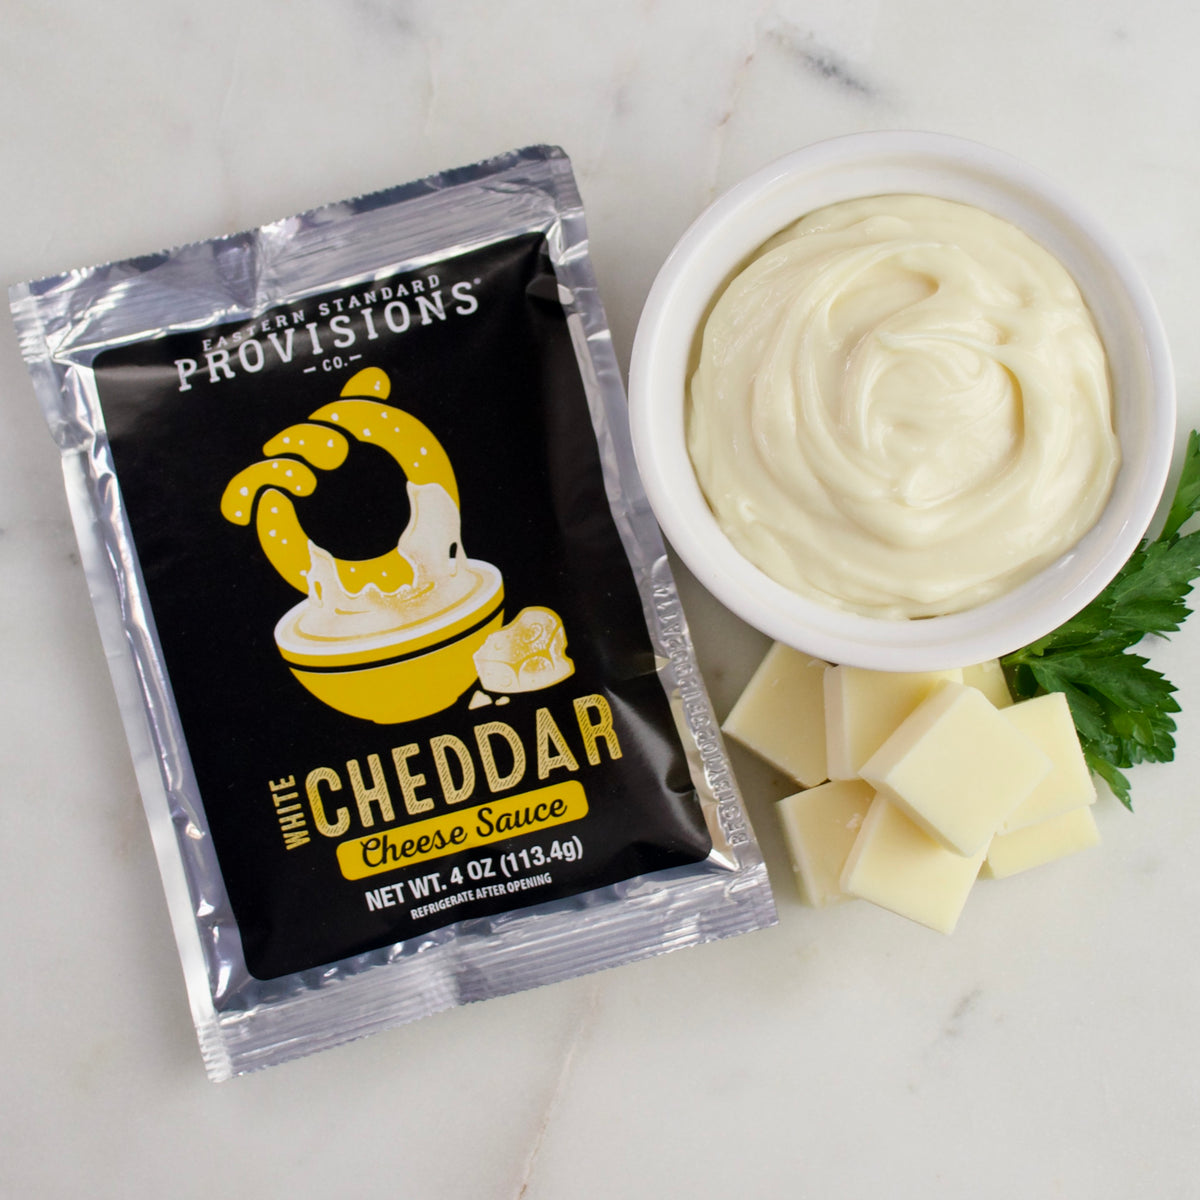 White Cheddar Cheese Sauce - Eastern Standard Provisions